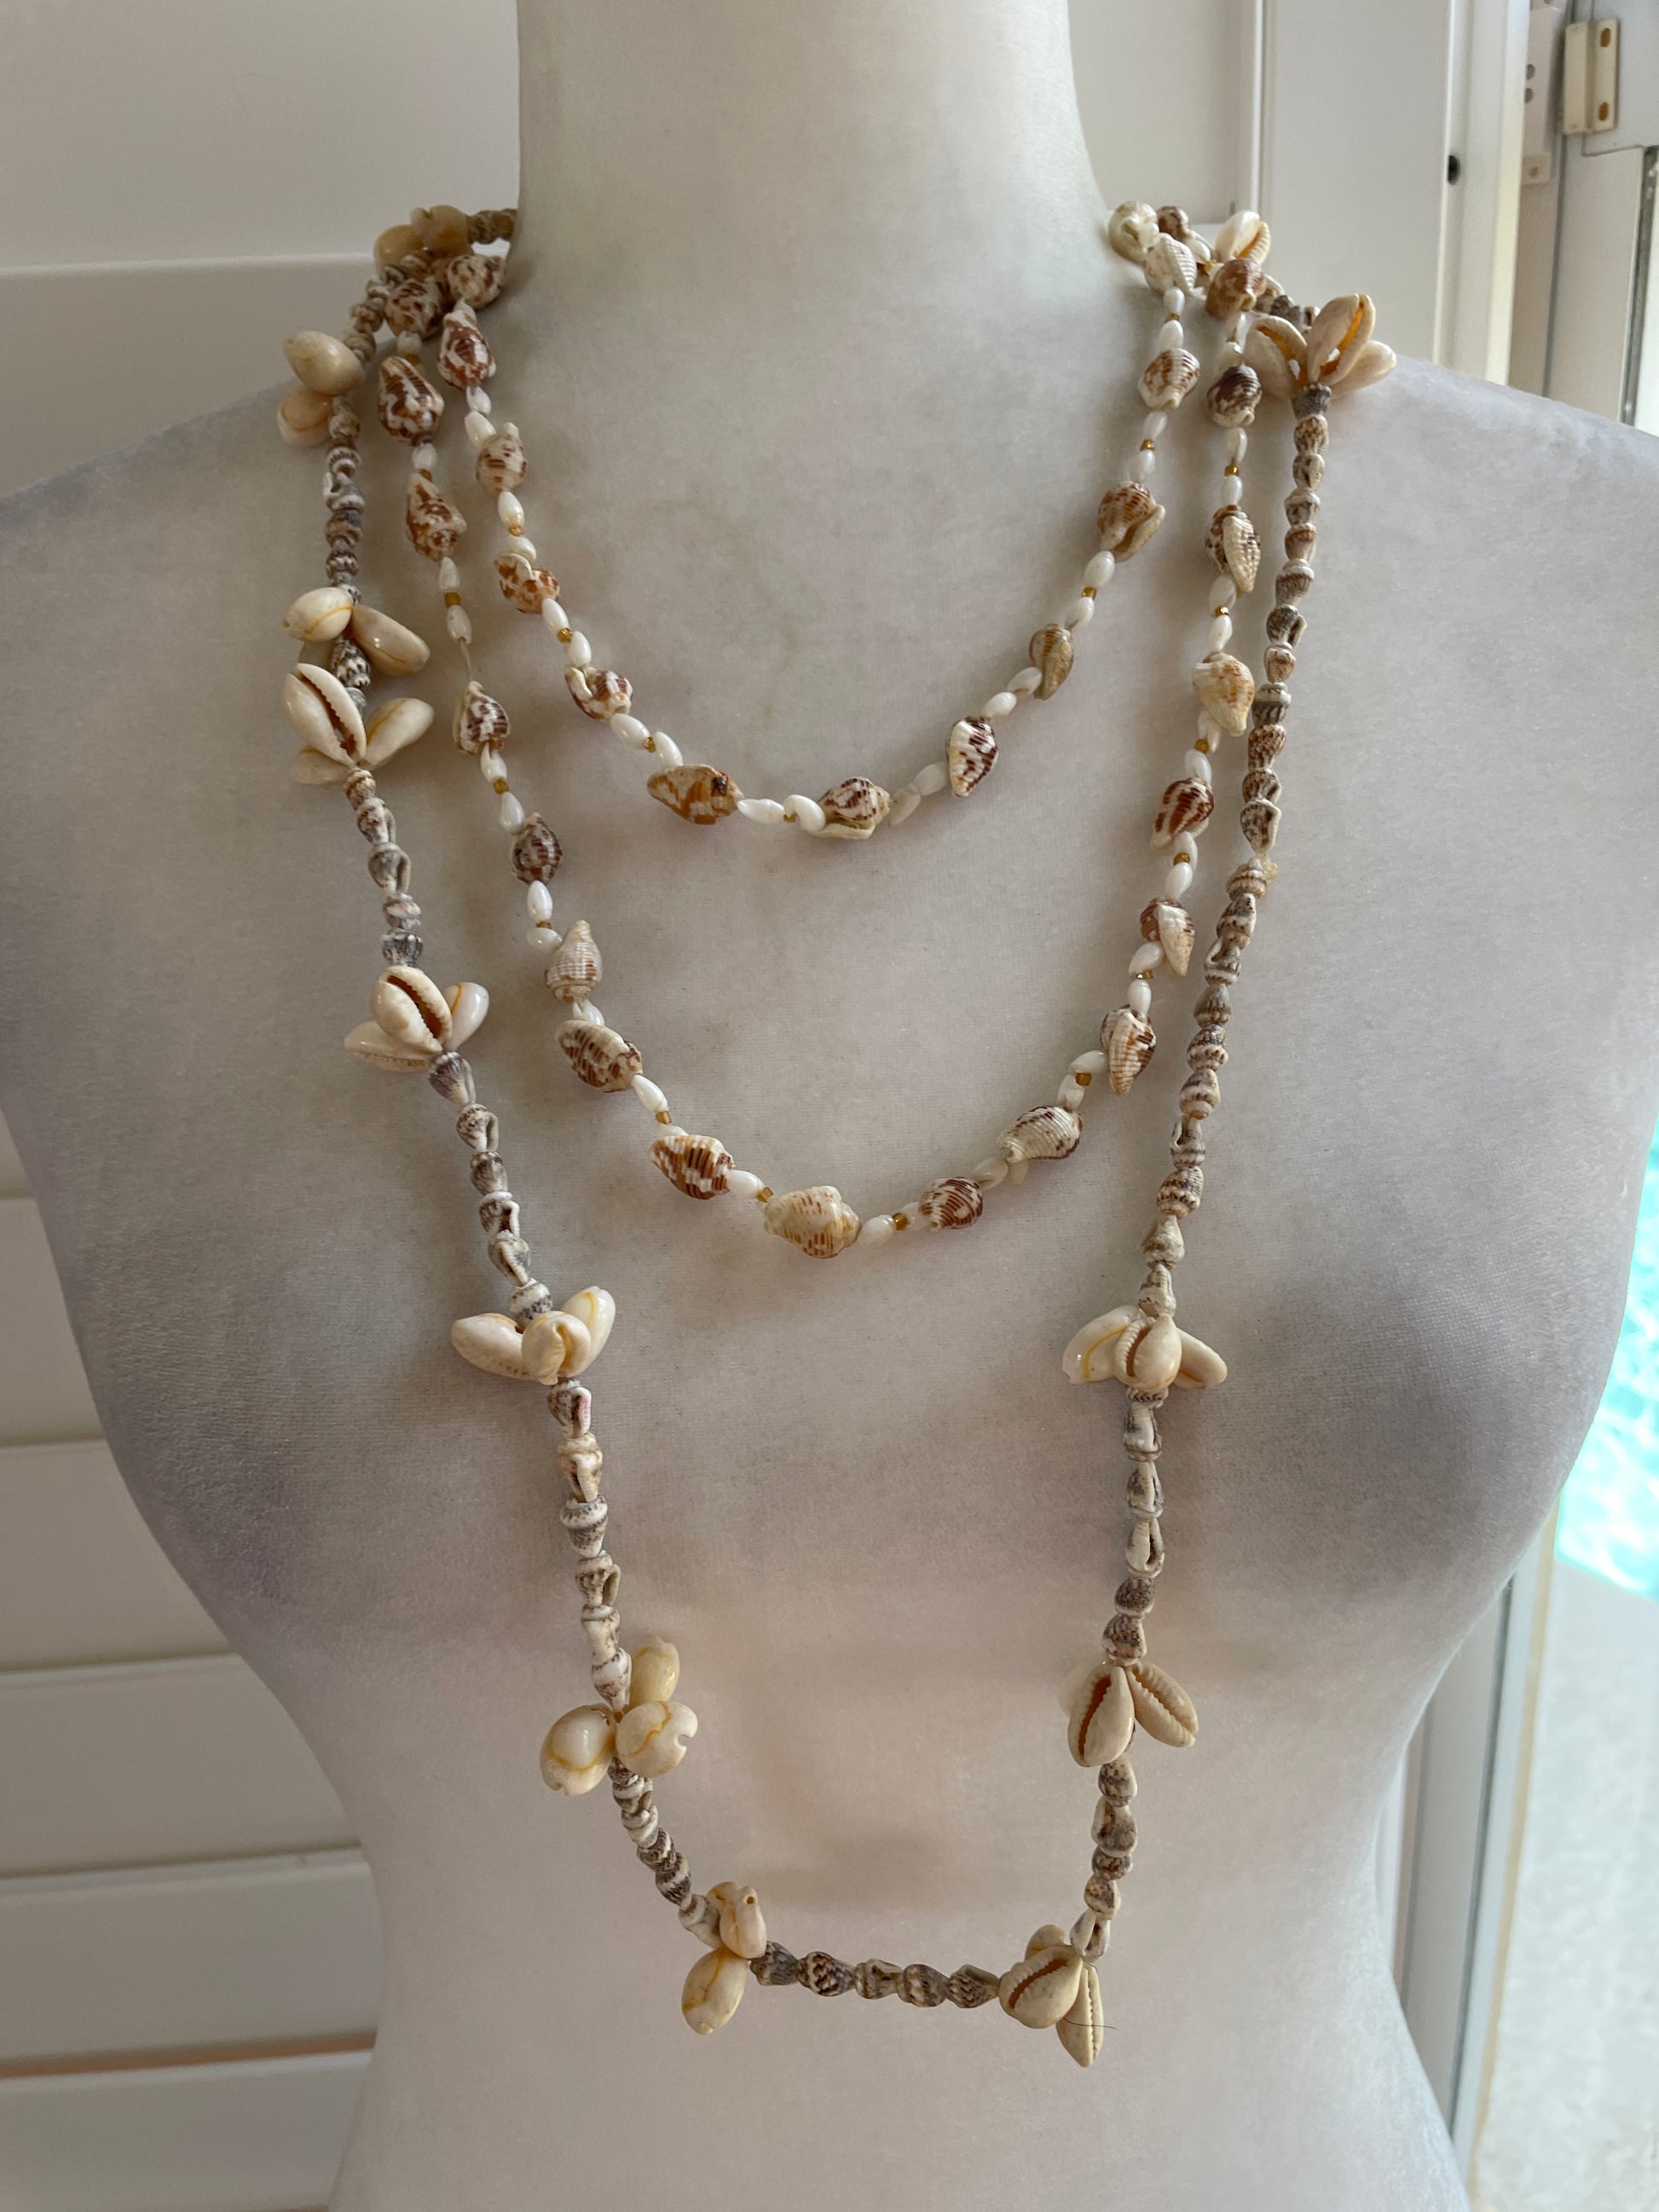 70s handmade shell necklaces Handmade 70s Natural Shell Bundle of 2 Stylish Boho Beach Layered Vintage Necklaces